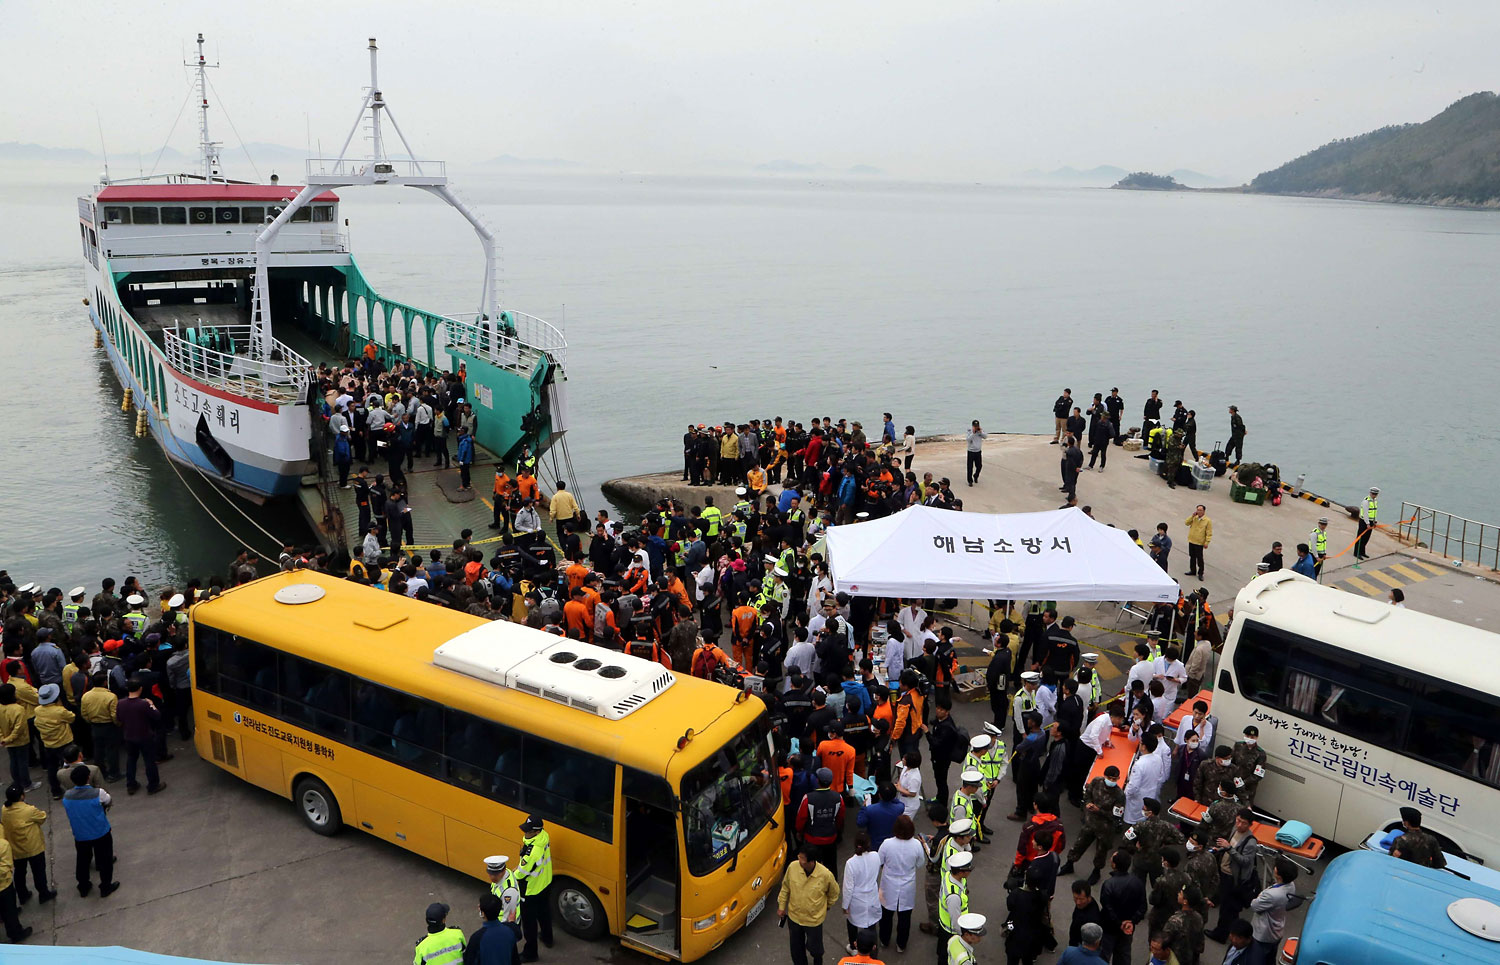 Rescued passengers brought onto land in Jindo after a South Korean ferry carrying 477 passengers and crew capsized on its way to Jeju island from Incheon, April 16, 2014